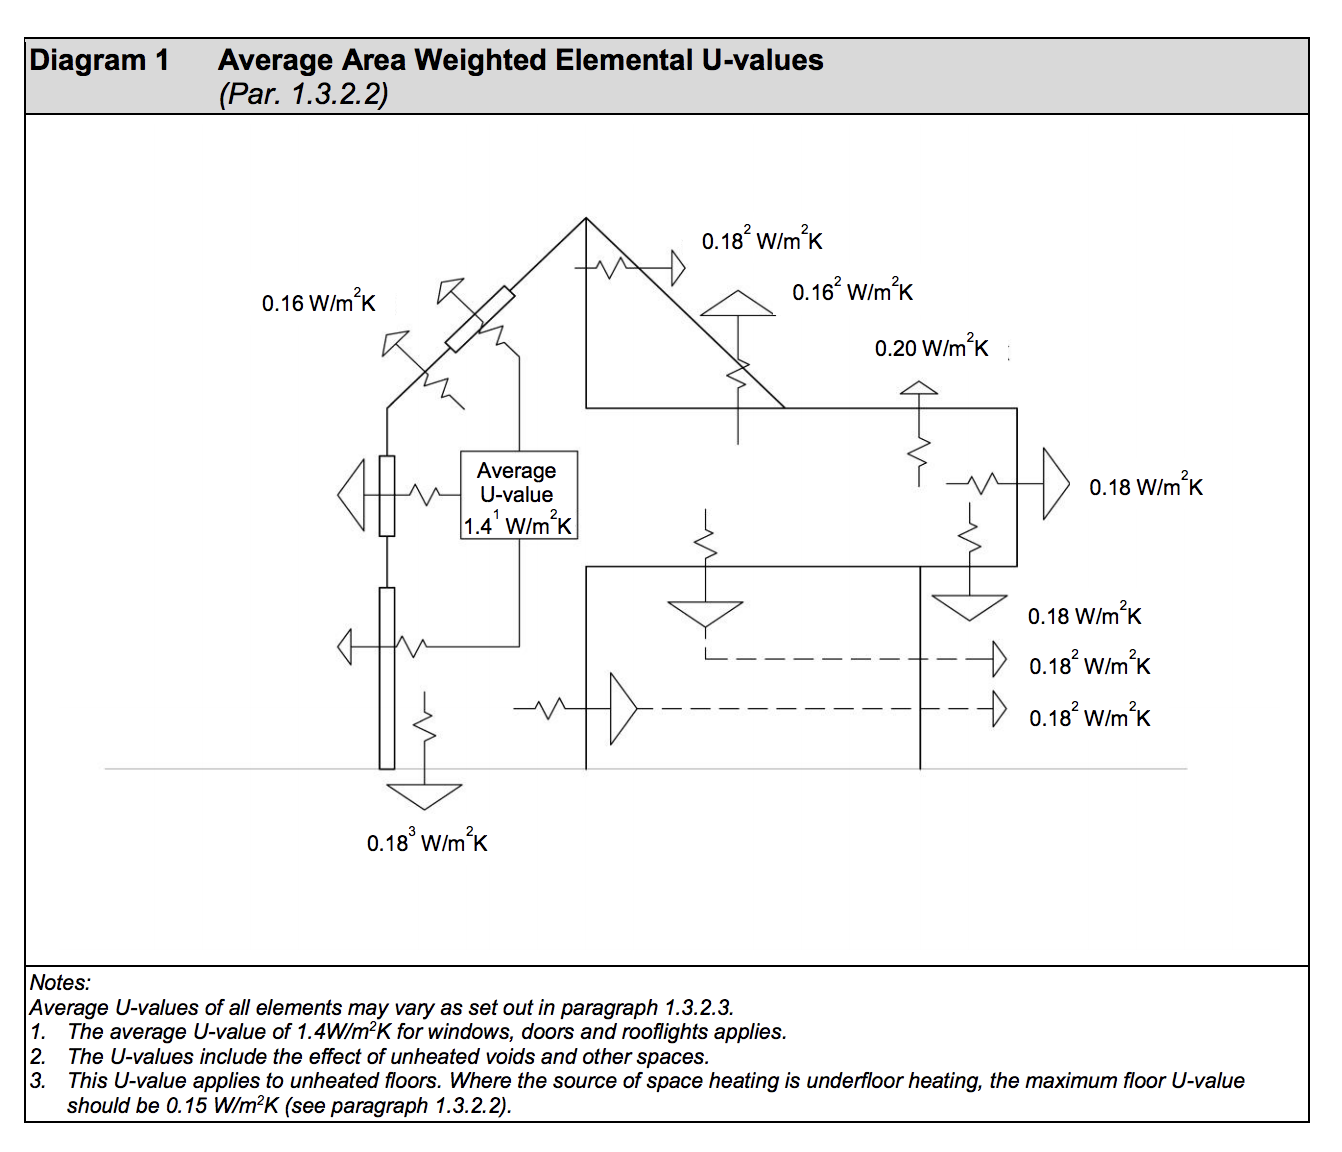 Diagram HL1 - Average area weighted elemental U-values - Extract from TGD L